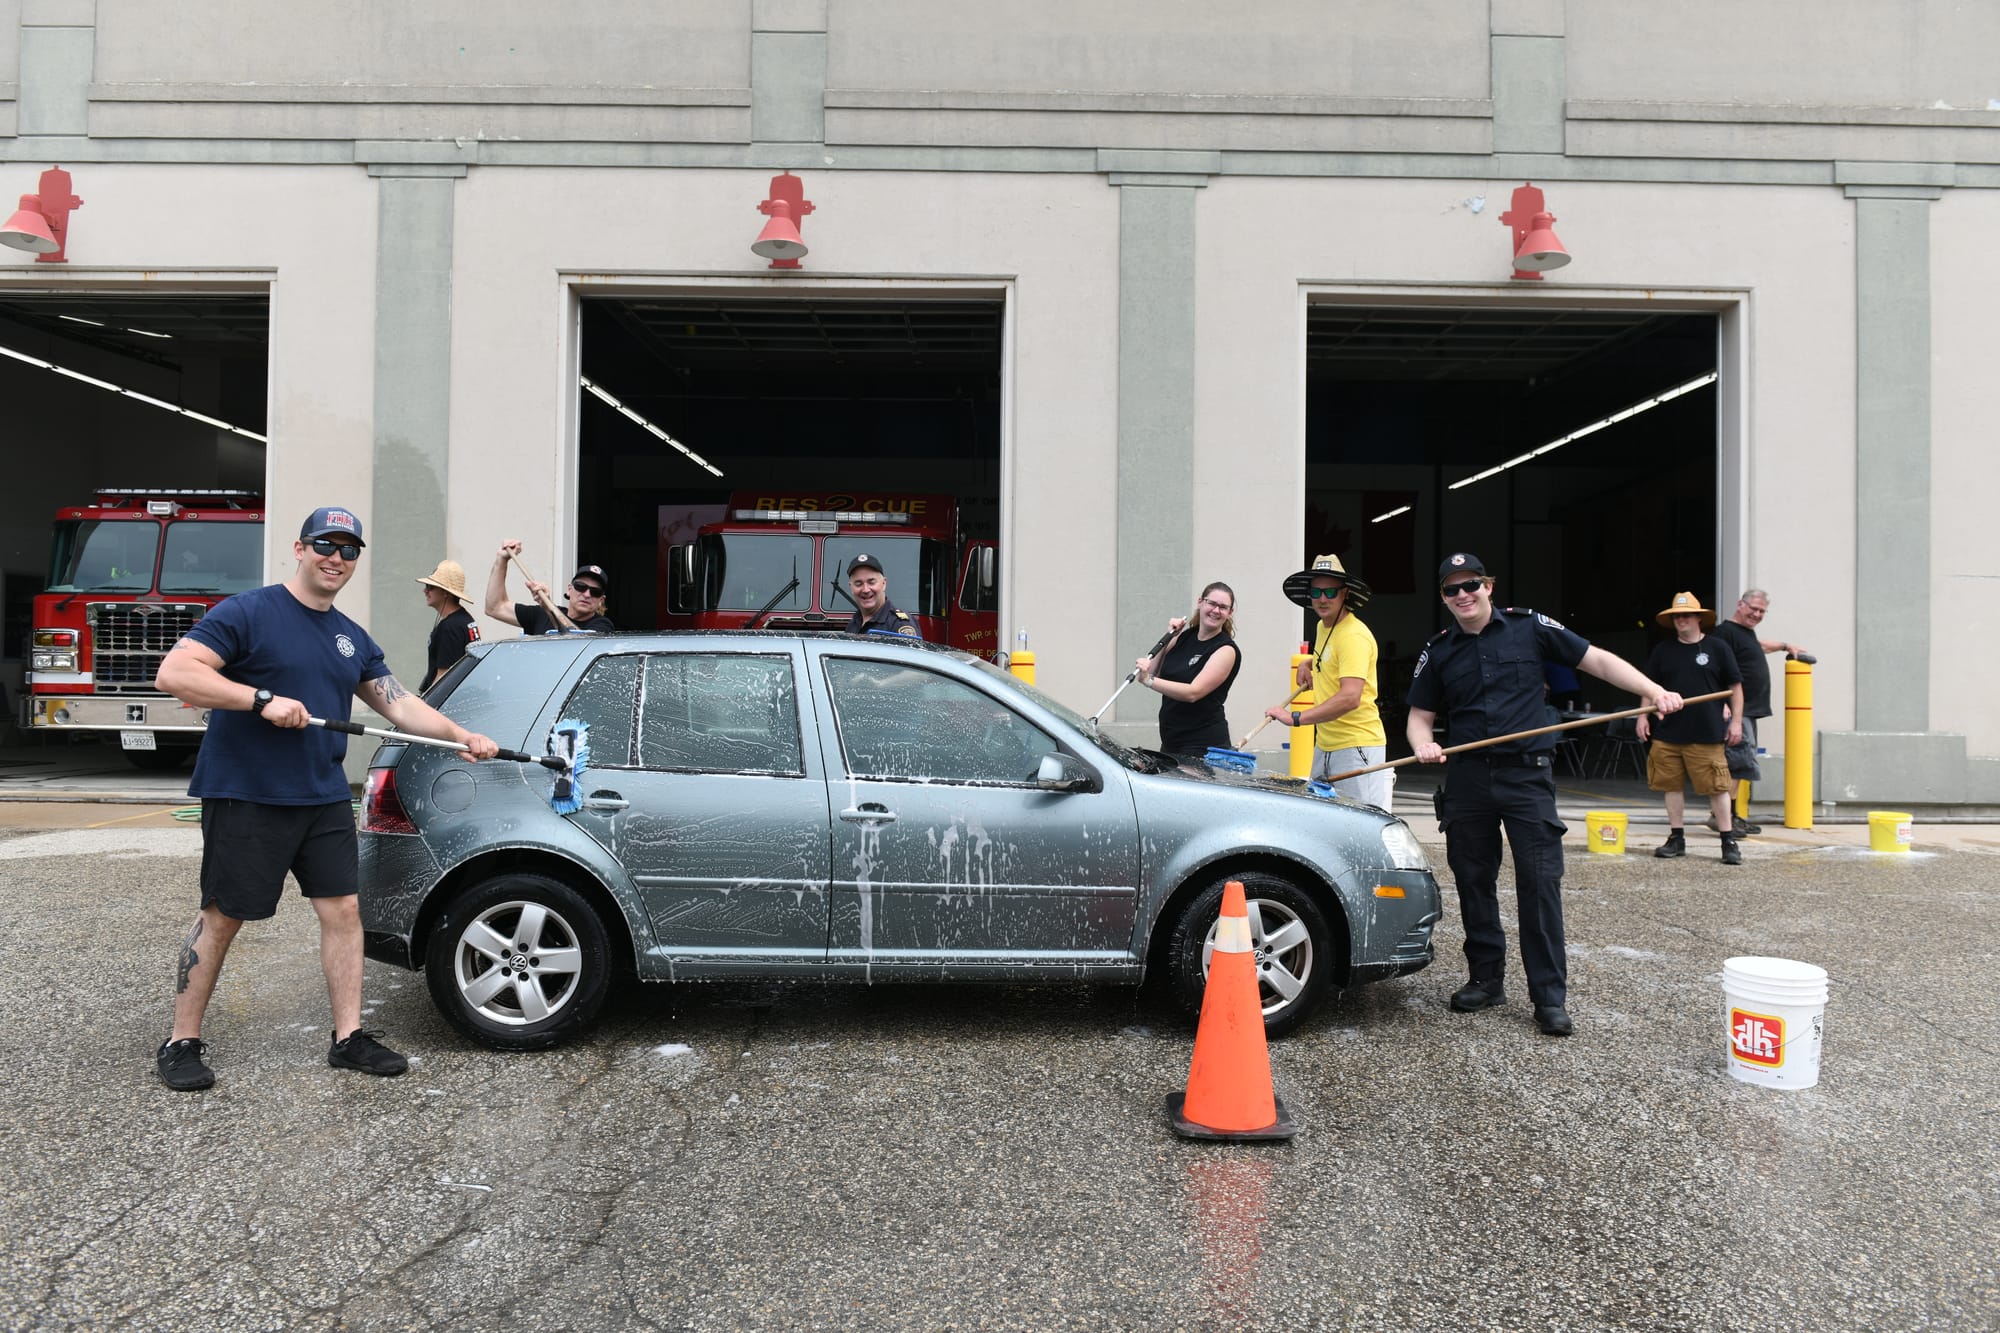 Firefighters car wash